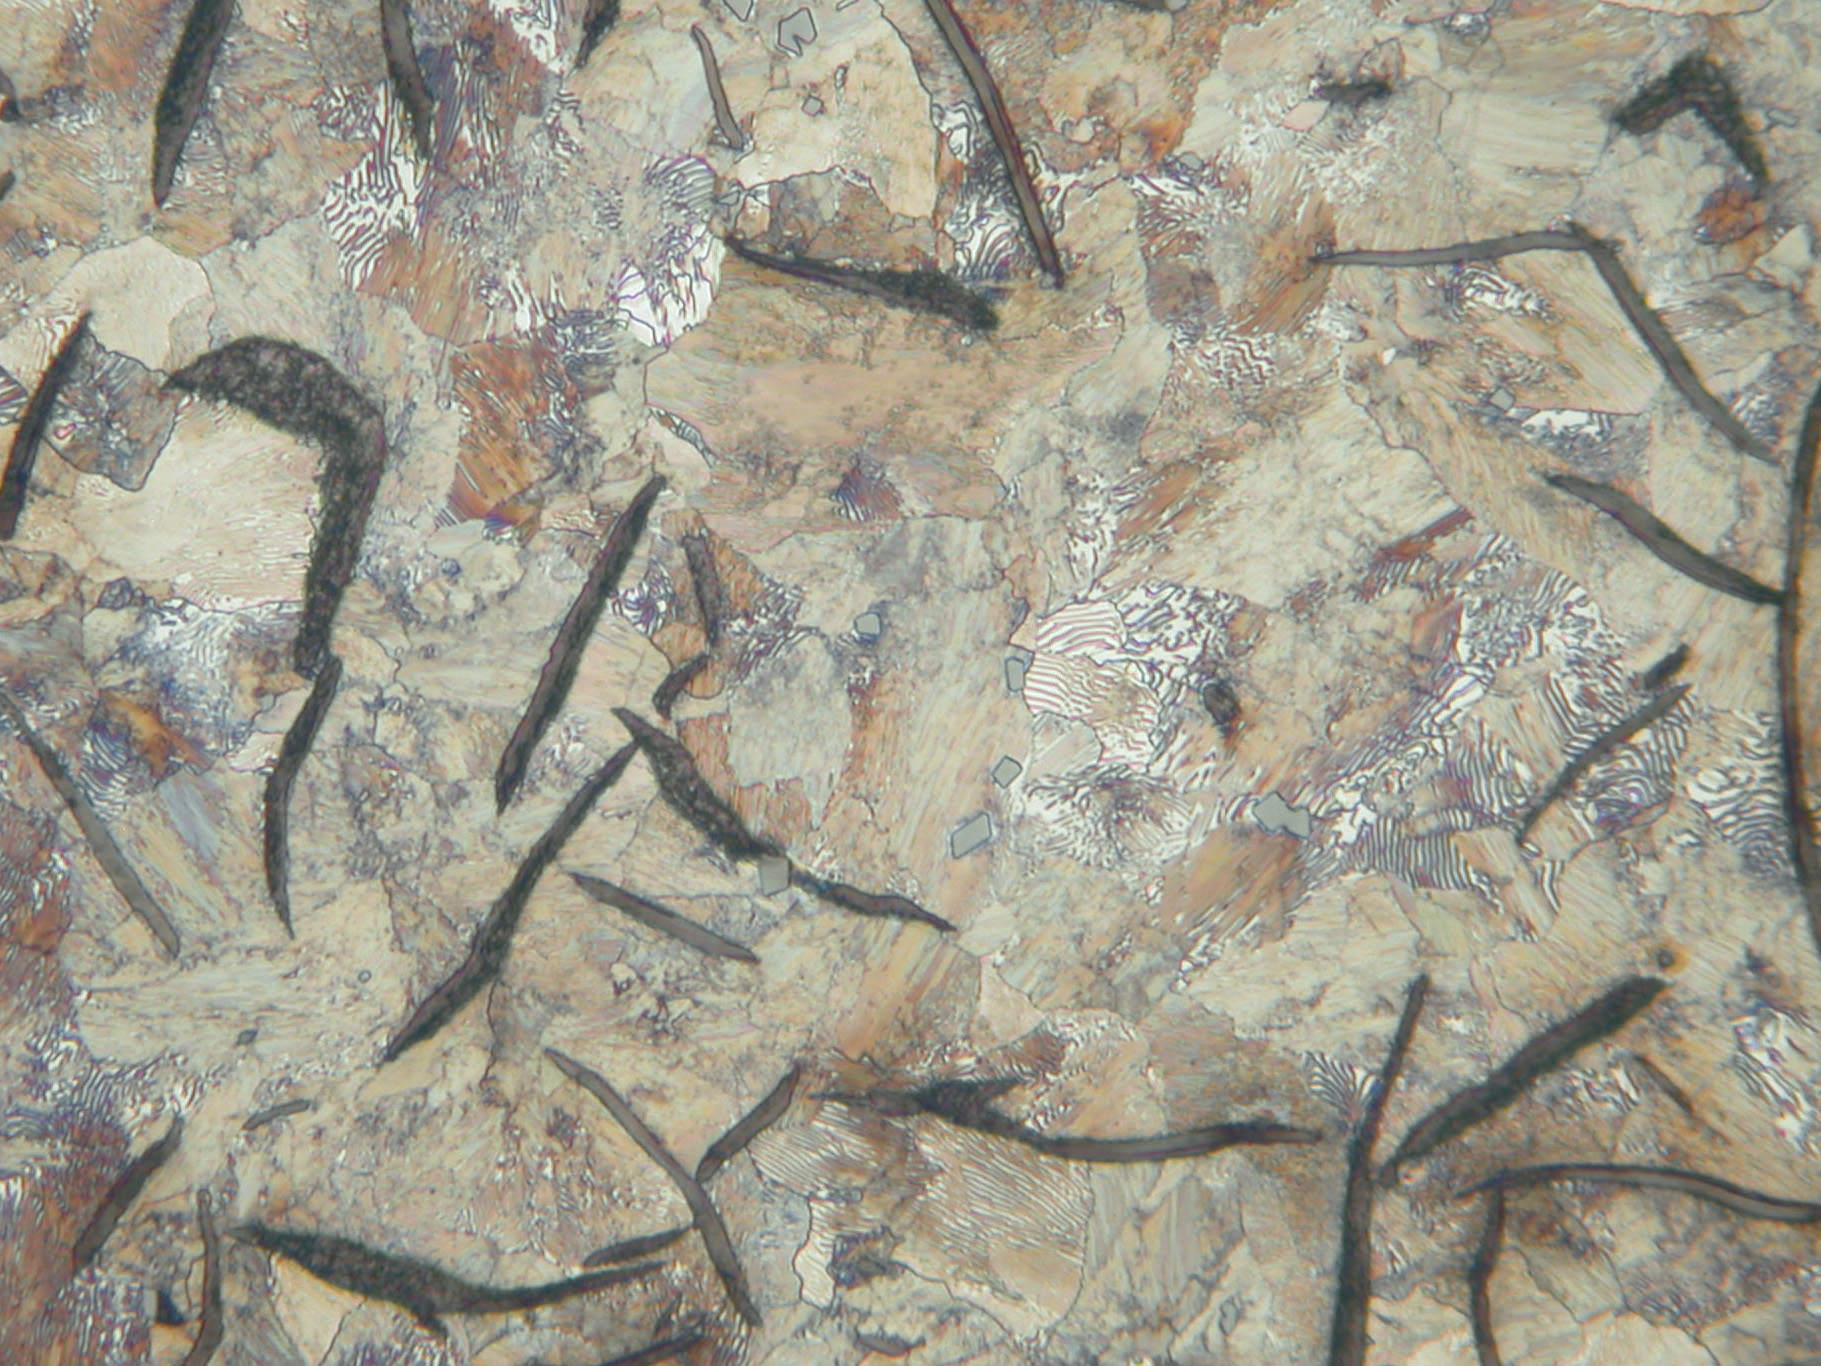 grey cast iron microstructure